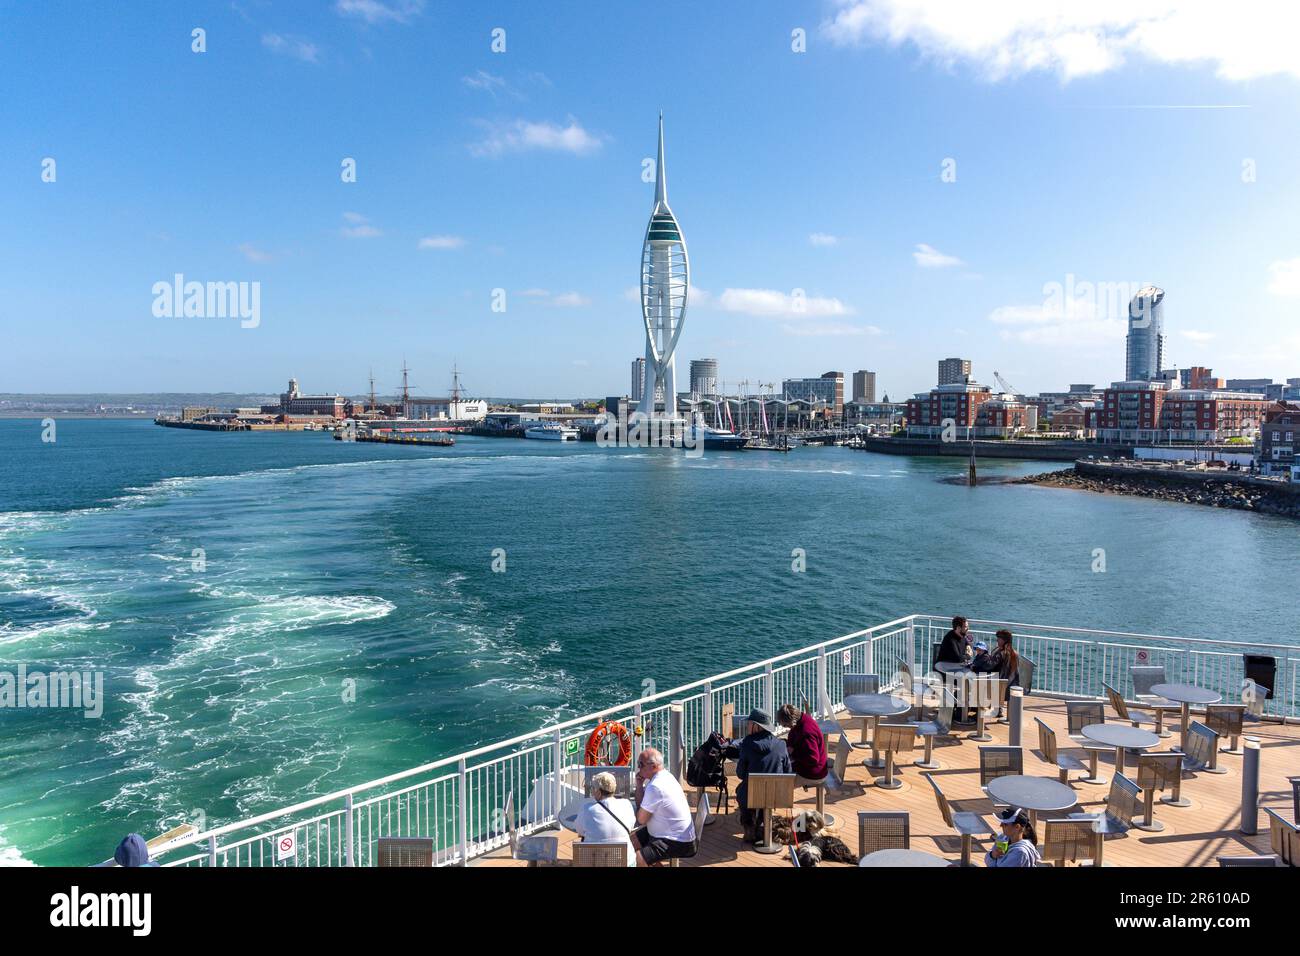 Spinnaker Tower and Gun Wharf from Wightlink ferry, Portsmouth Harbour, Portsmouth, Hampshire, England, United Kingdom Stock Photo